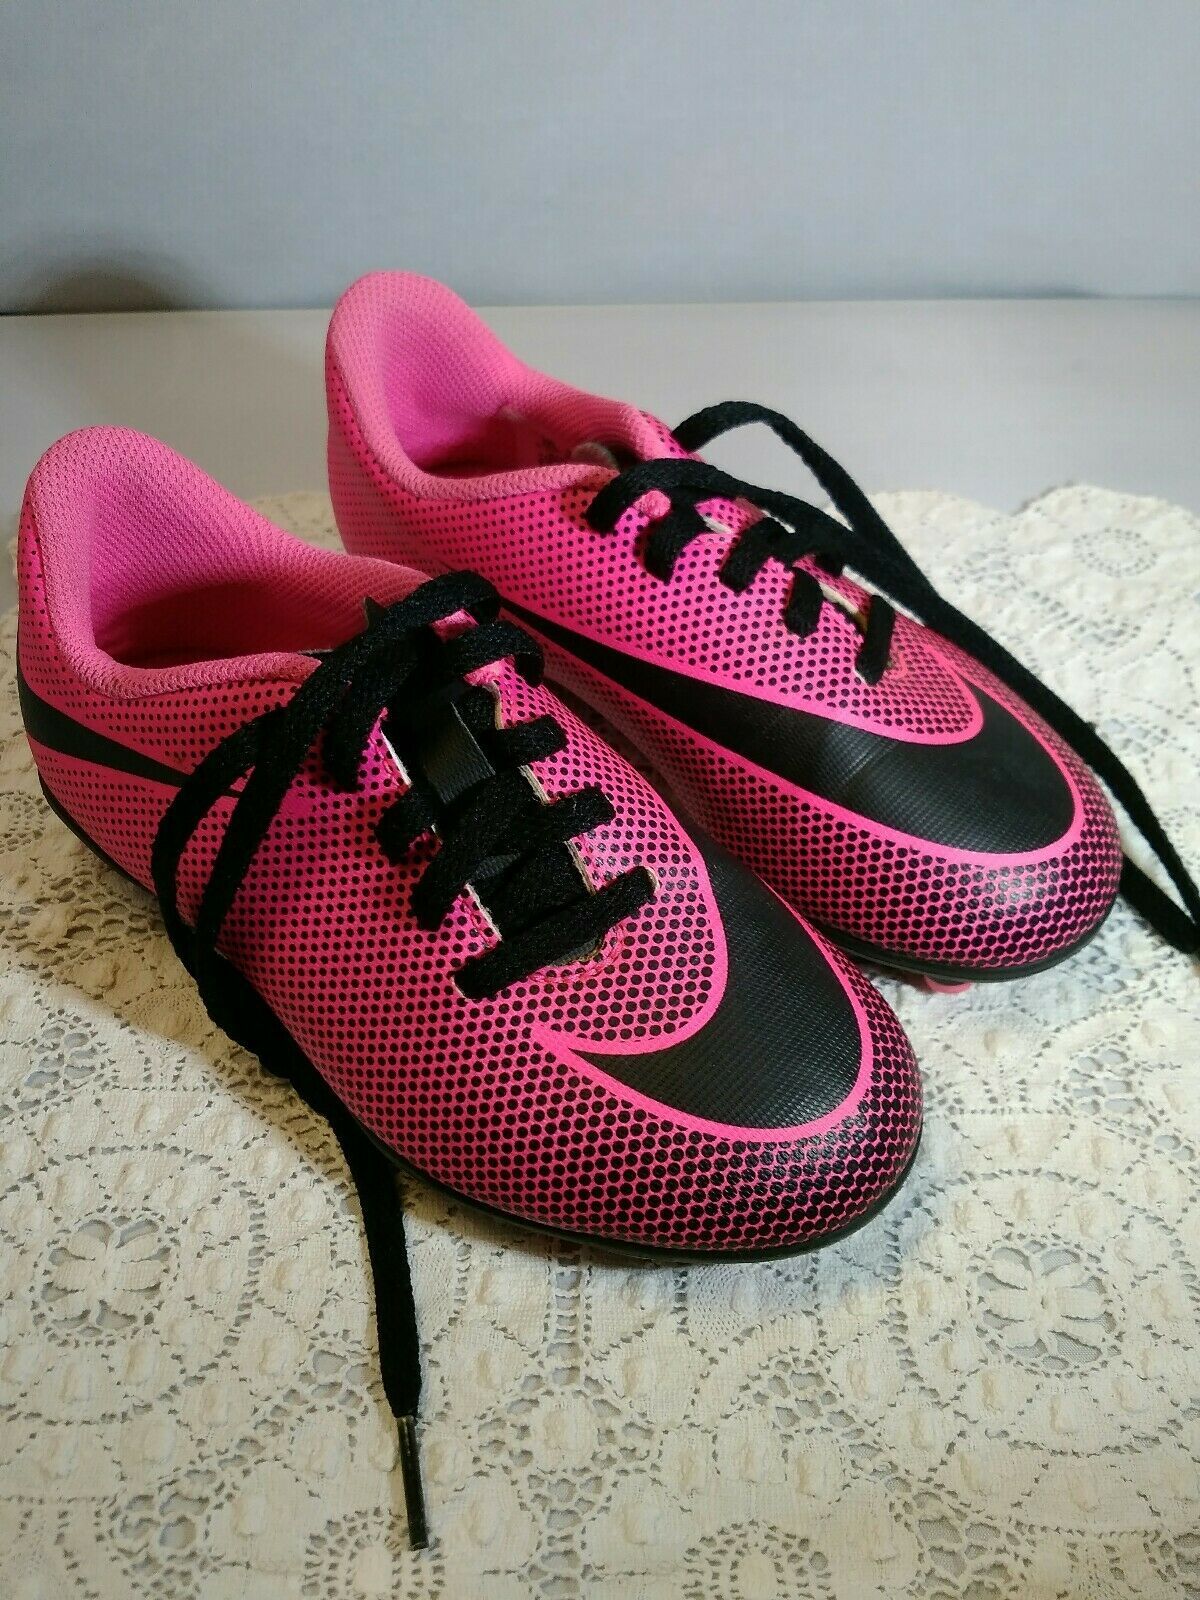 girls soccer cleats size 12